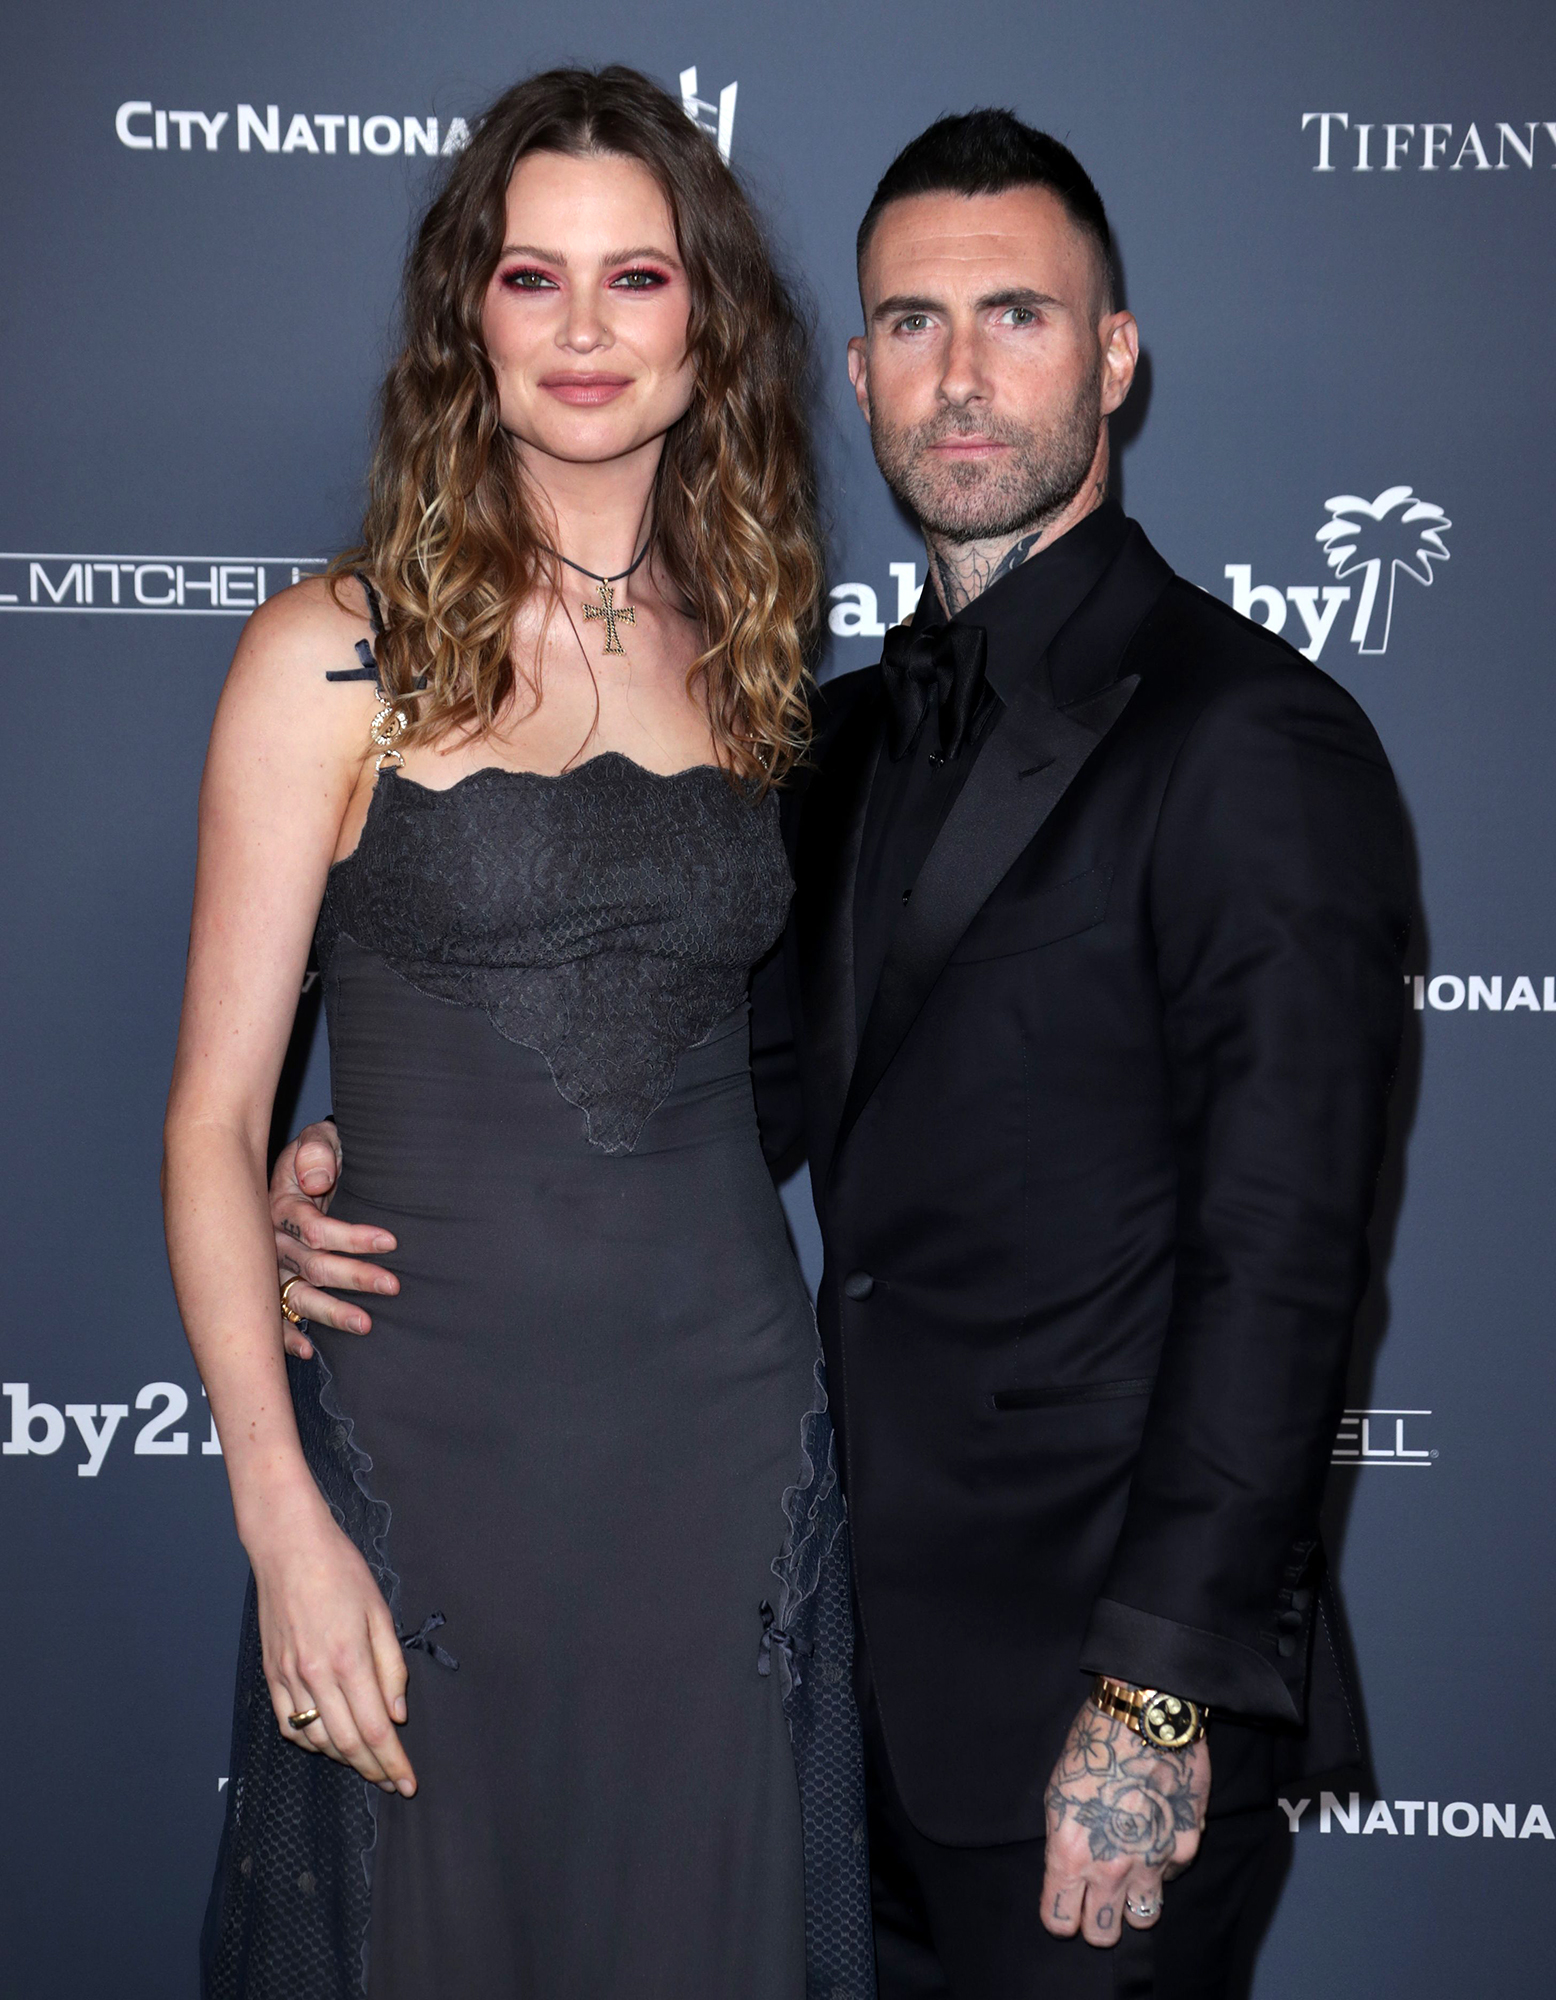 Adam Levine Accused of Cheating: What to Know About the Women